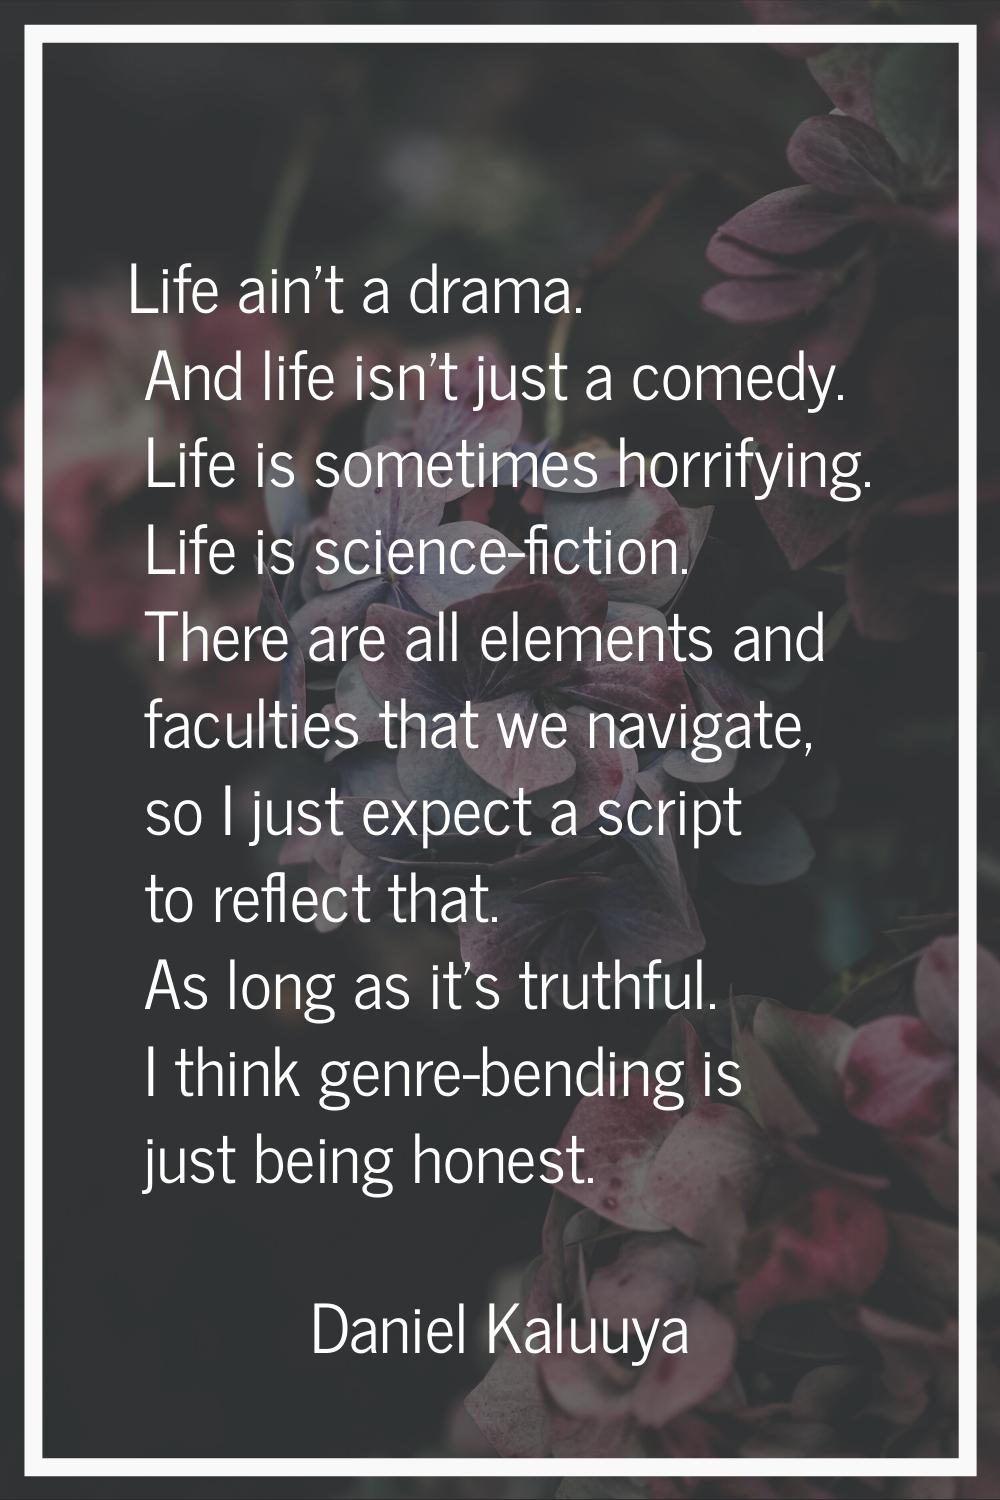 Life ain't a drama. And life isn't just a comedy. Life is sometimes horrifying. Life is science-fic